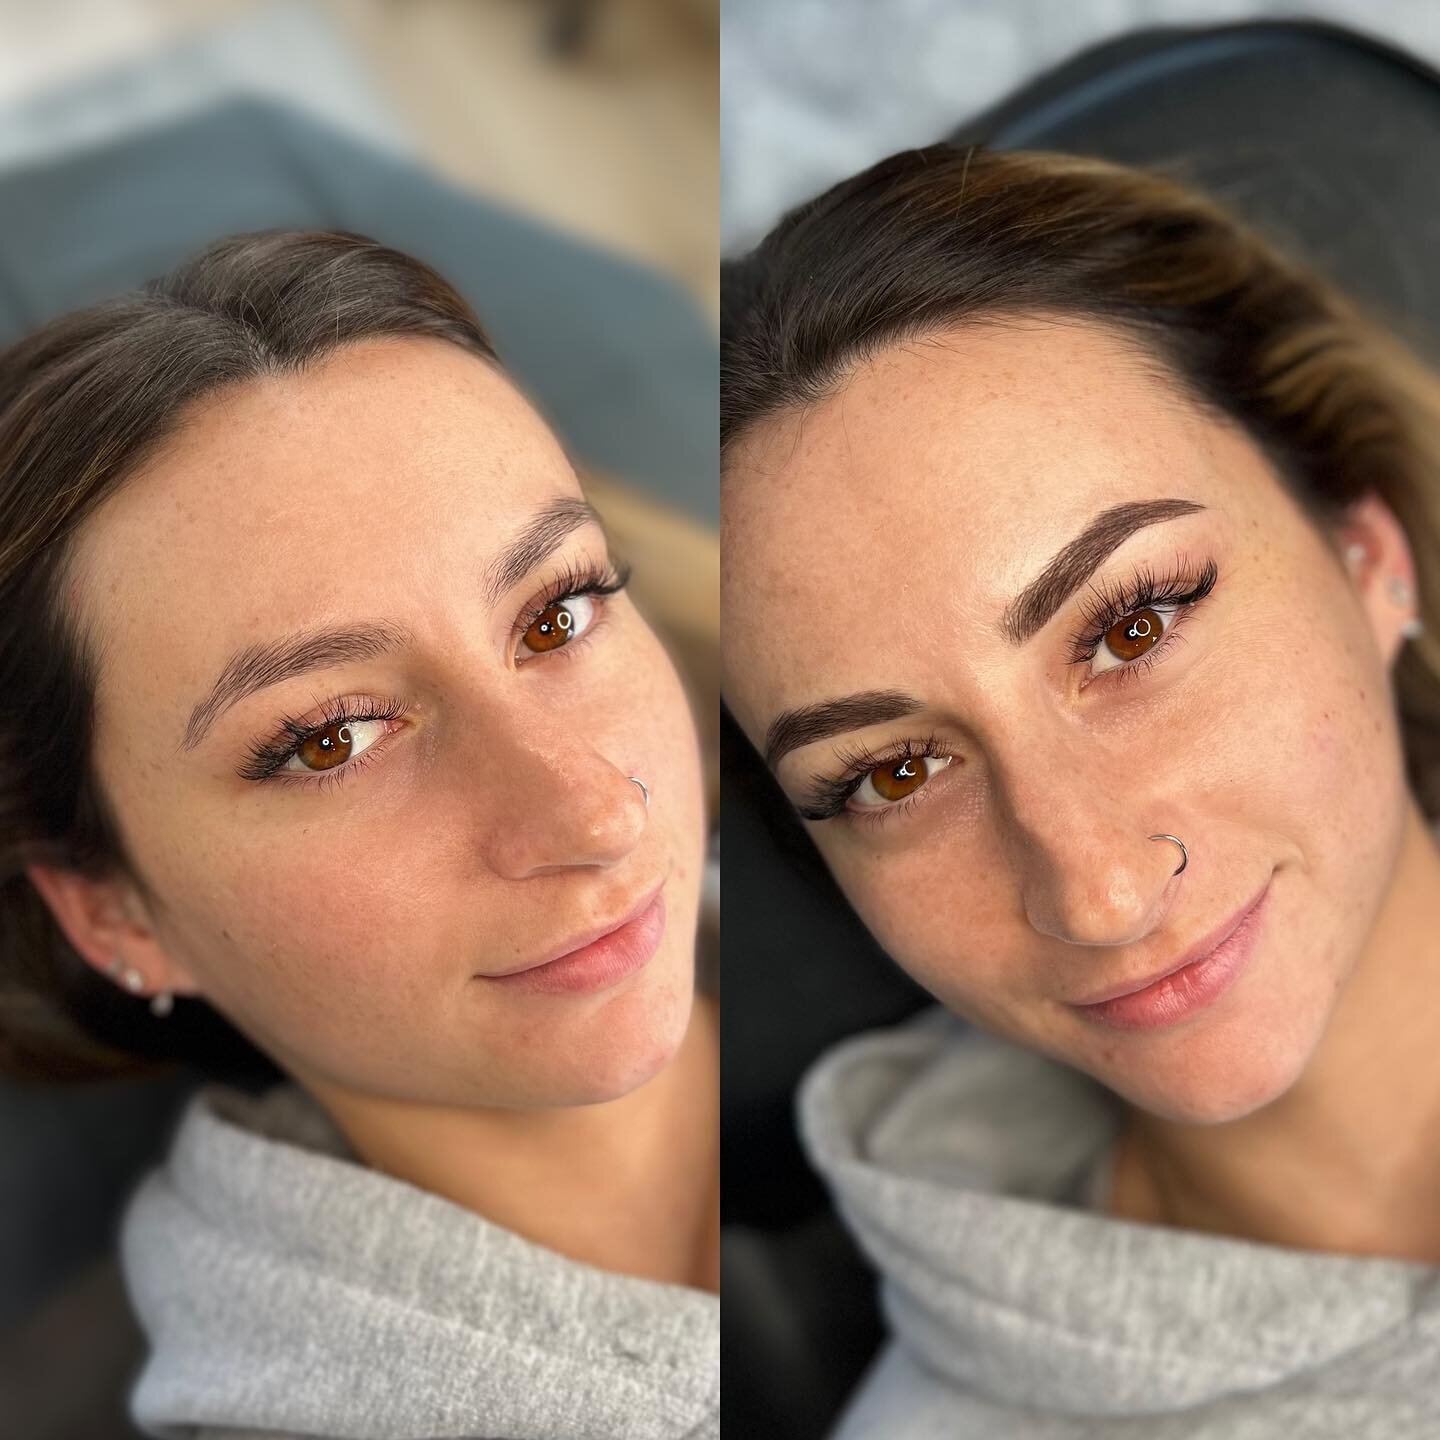 The perfect Powder Brow 🤎 This was such a fun appointment! My February books are now OPEN (for both Sarnia and Chatham). Click the link in my bio or visit www.browsbylarissa.com. 

#powderbrows #chatham #sarnia